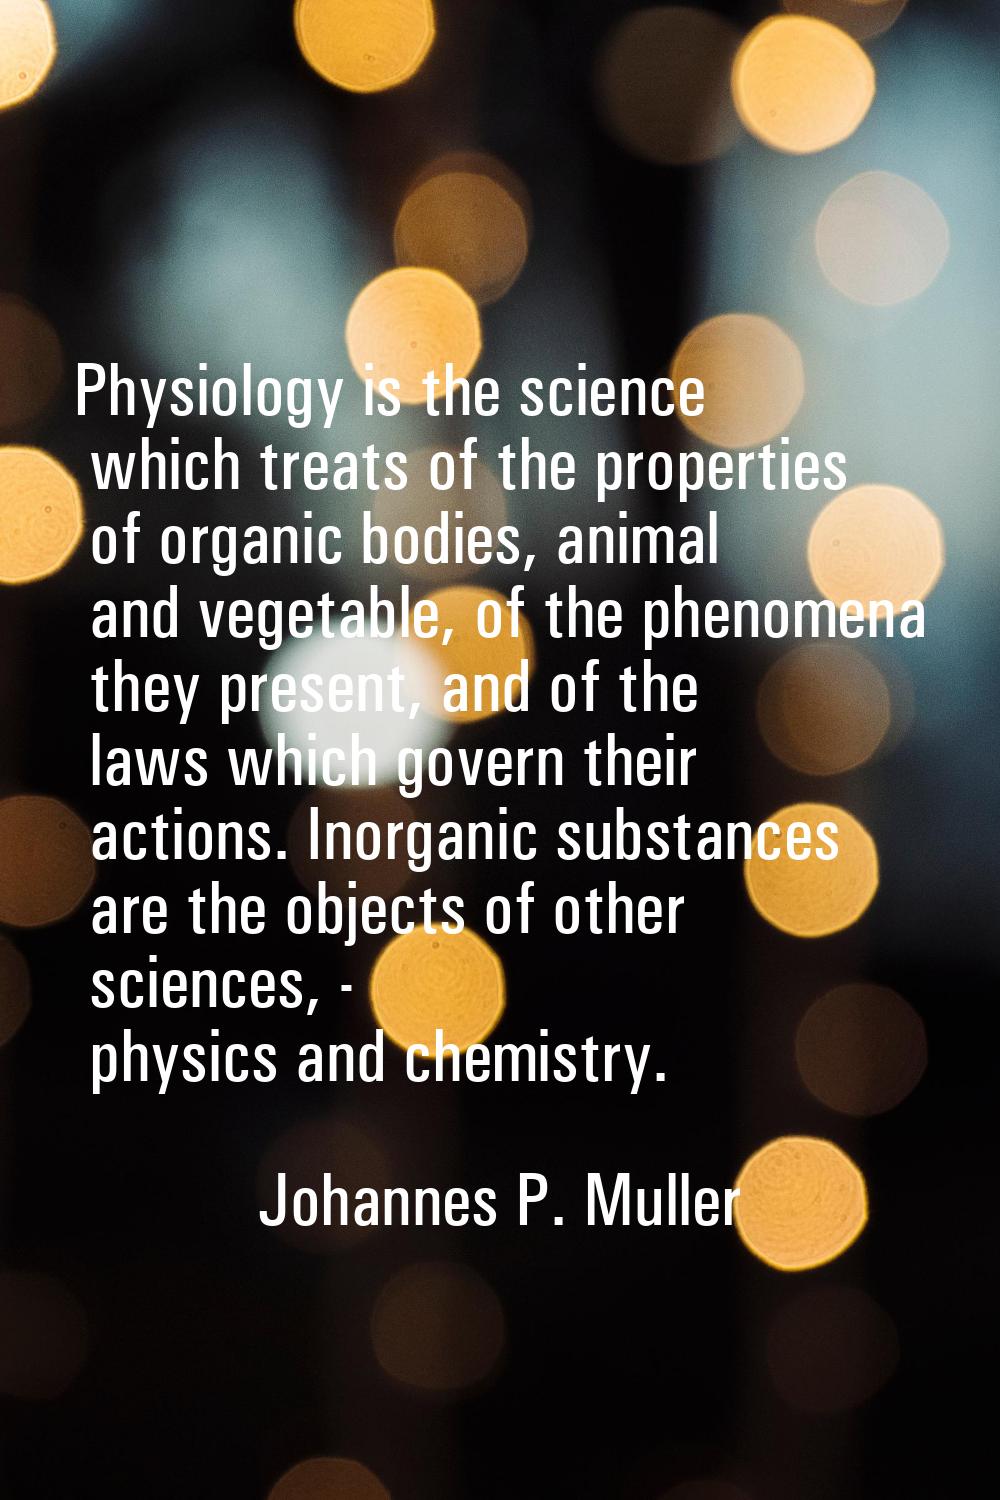 Physiology is the science which treats of the properties of organic bodies, animal and vegetable, o